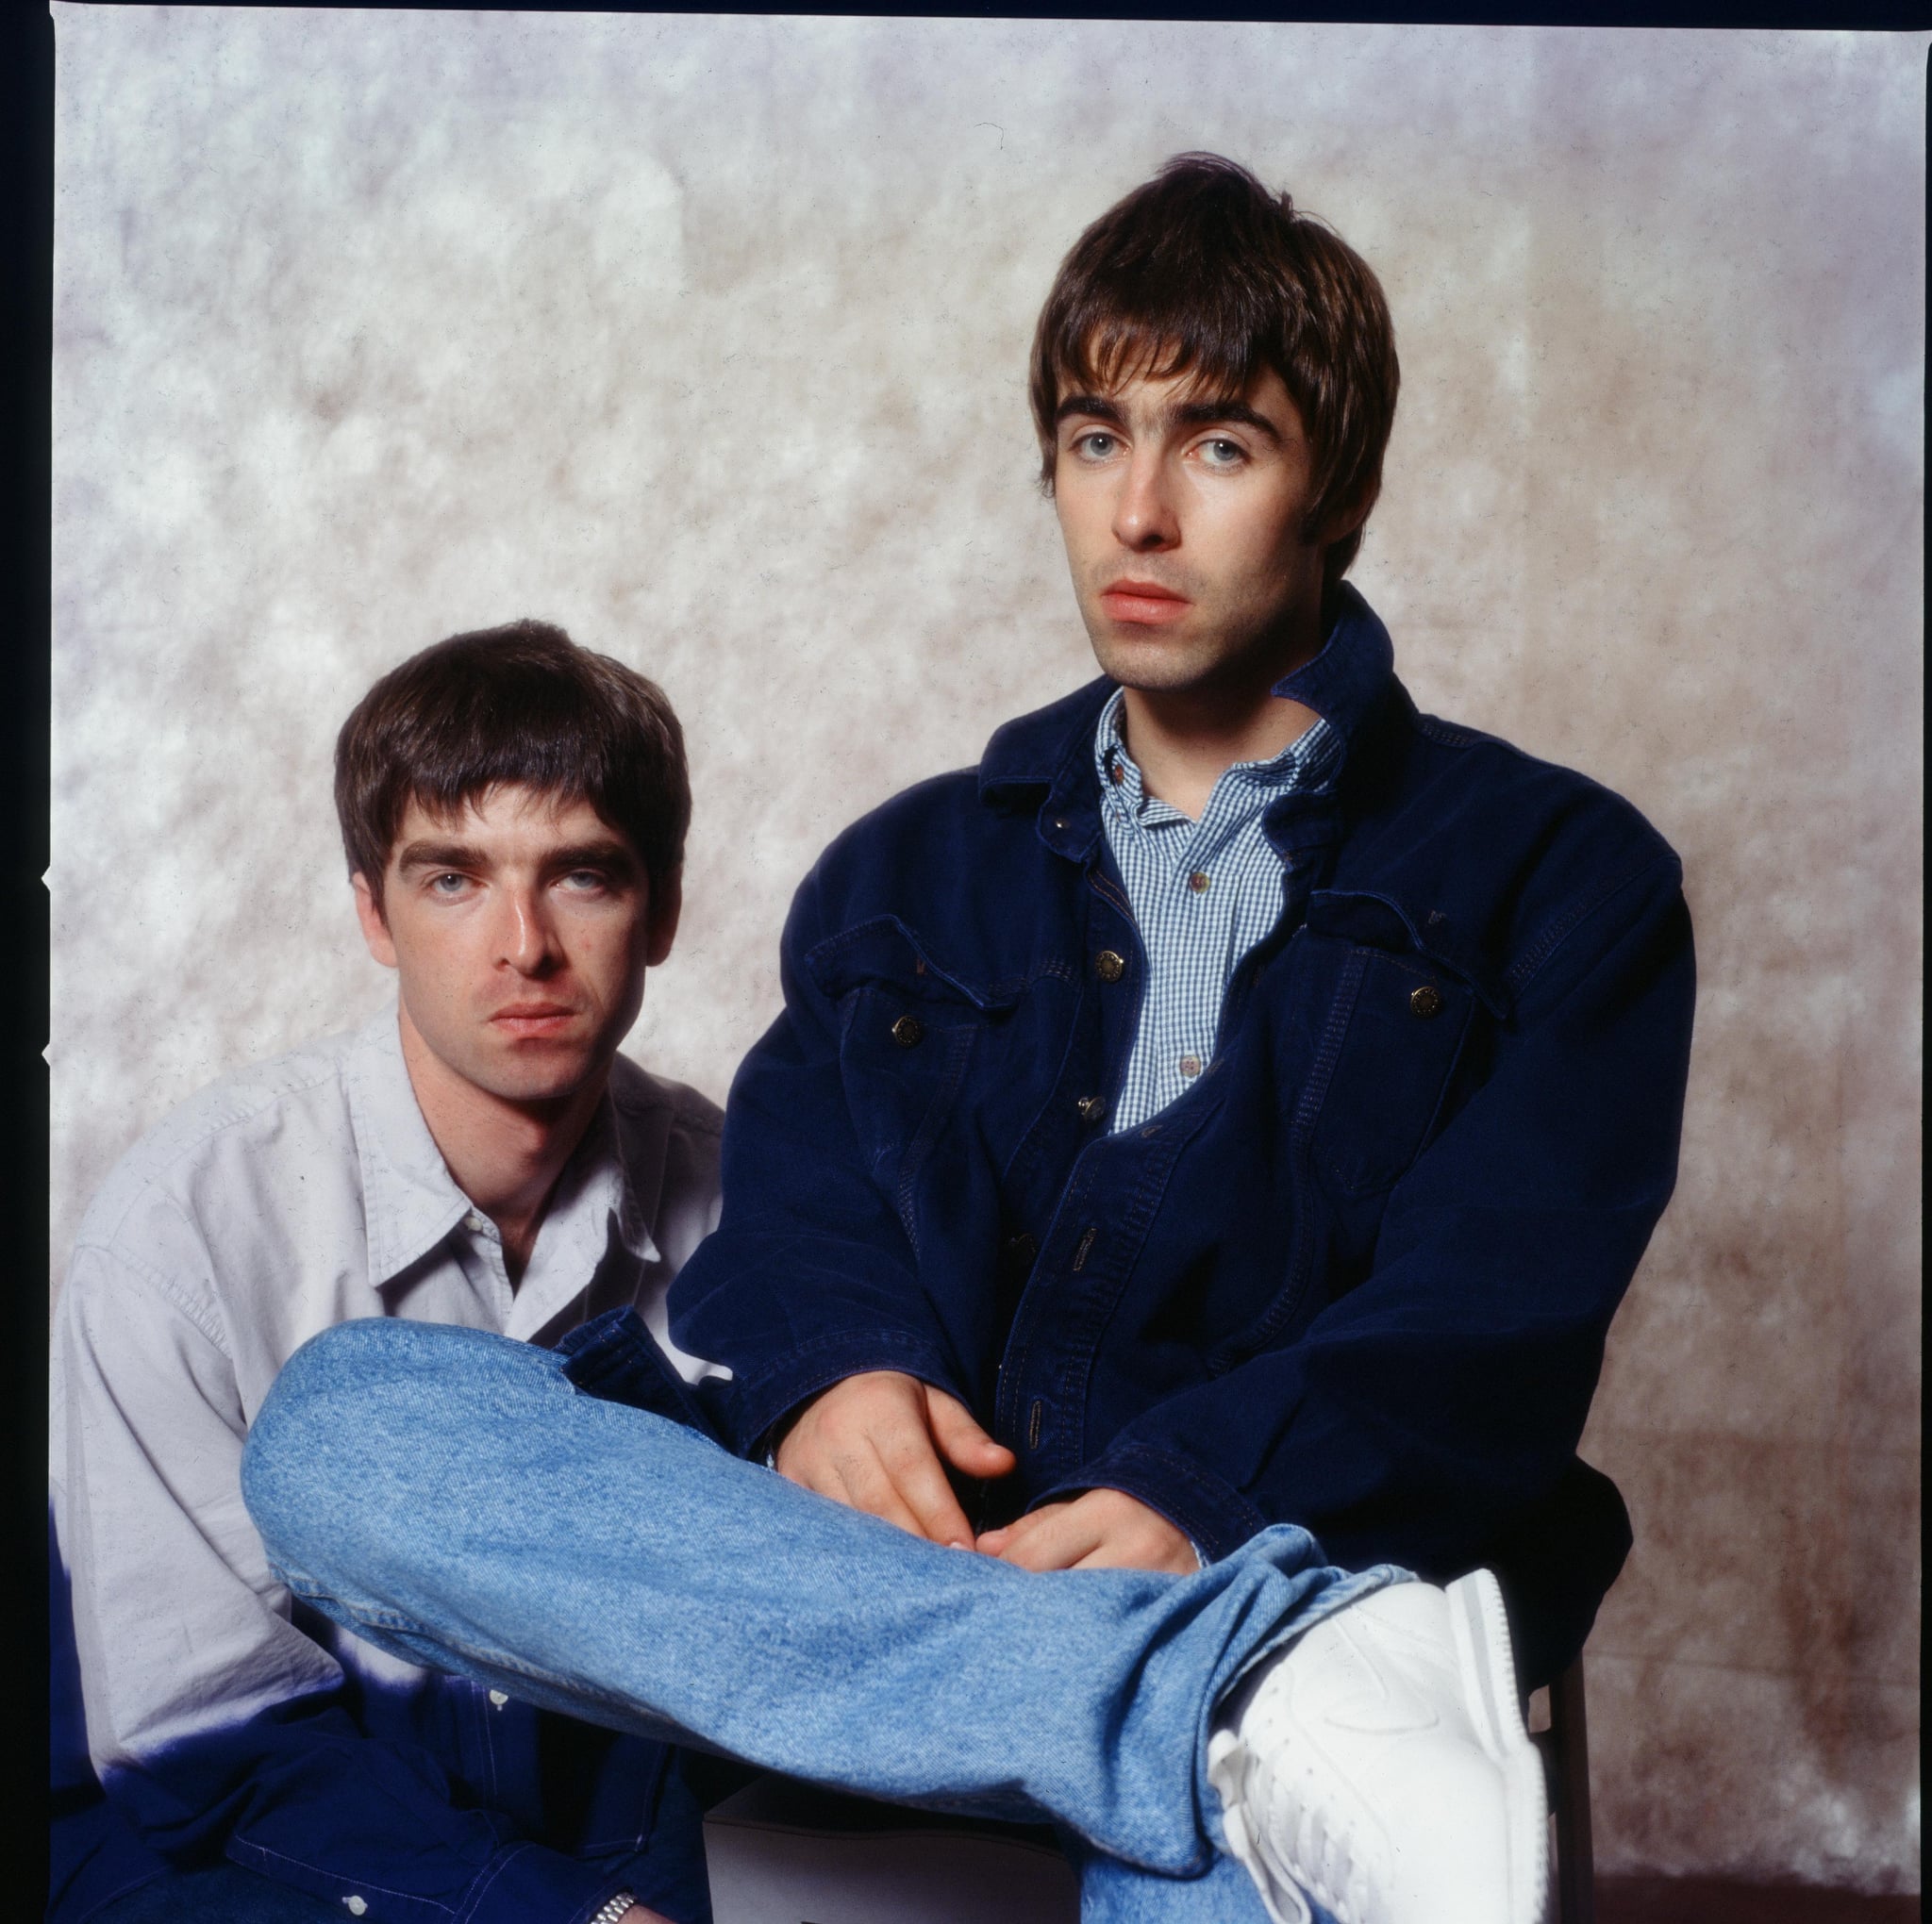 (MANDATORY CREDIT Koh Hasebe/Shinko Music/Getty Images) Noel Gallagher and Liam Gallagher of Oasis, at a photoshoot in a hotel in Tokyo, September 1994. (Photo by Koh Hasebe/Shinko Music/Getty Images)